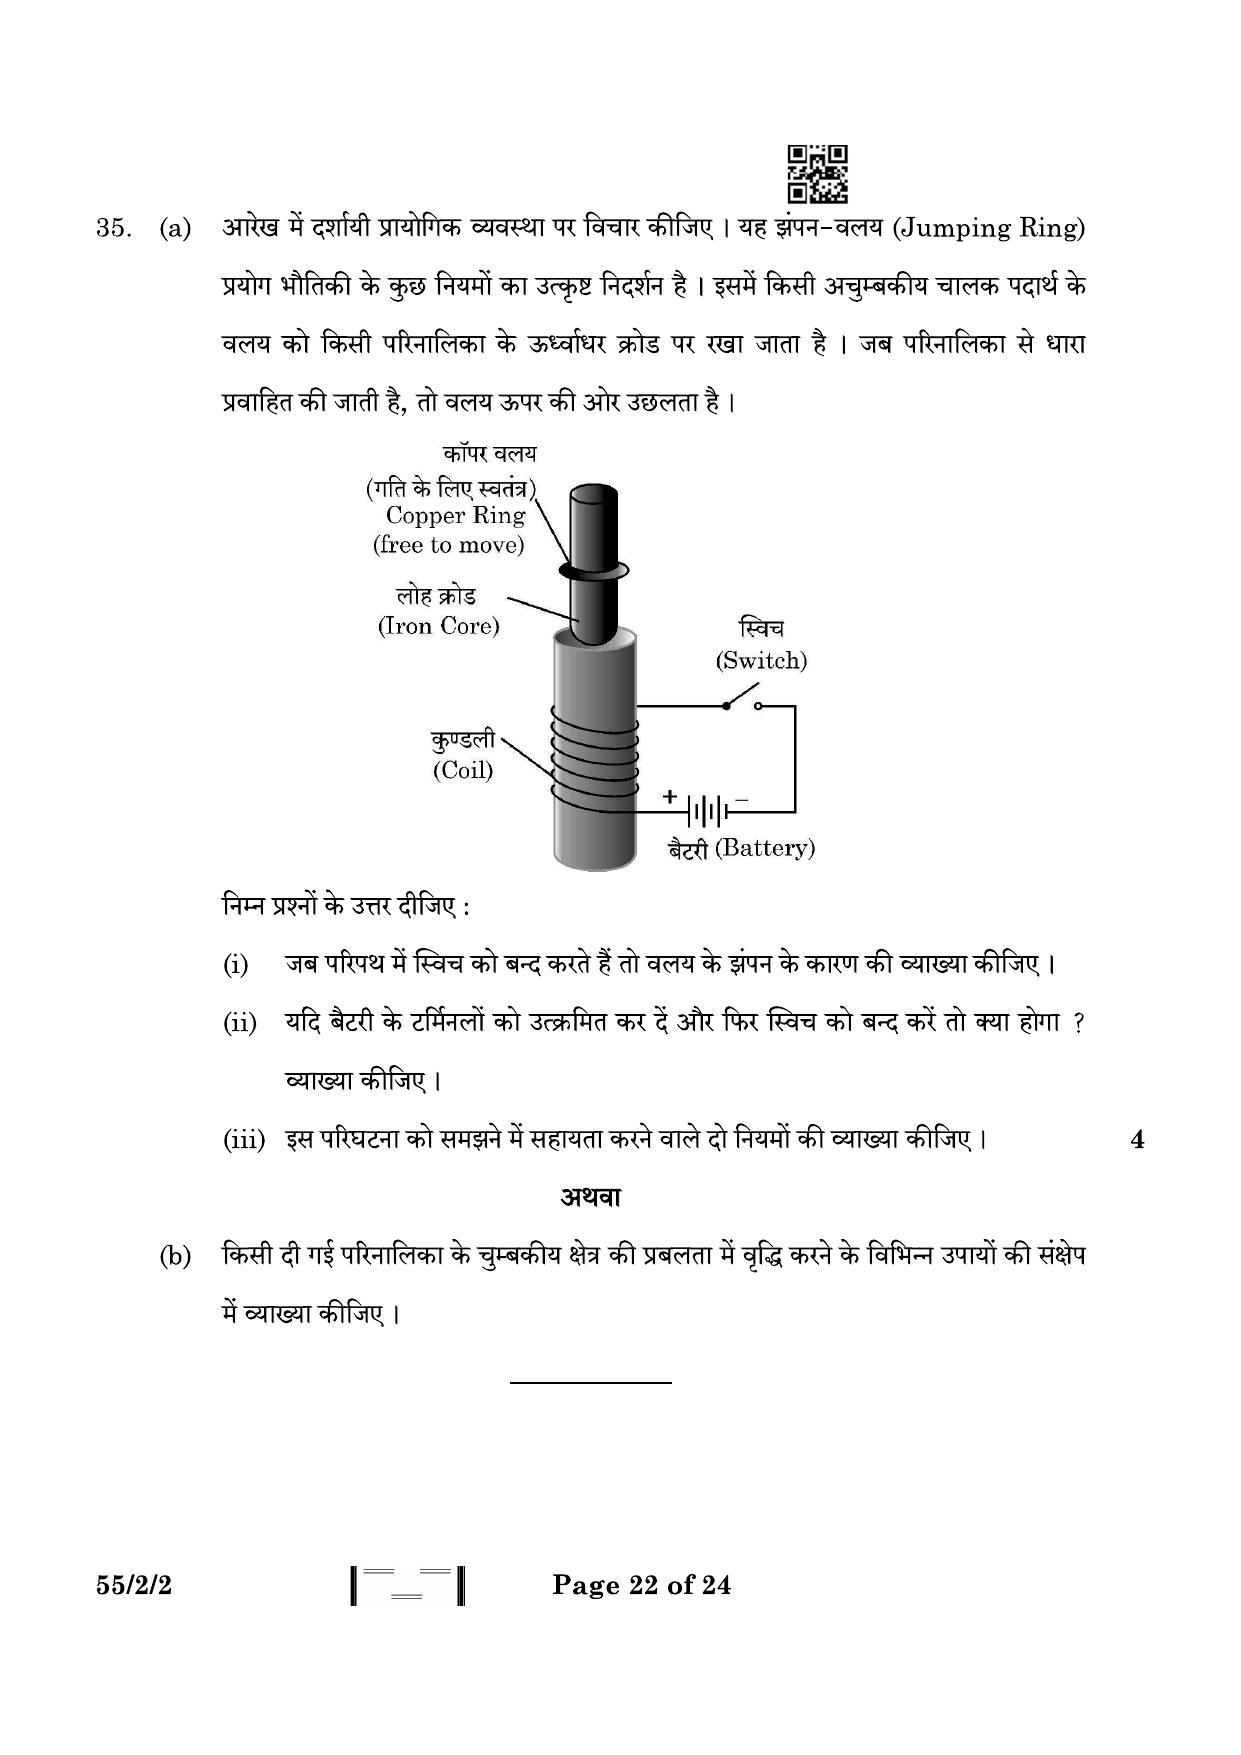 CBSE Class 12 55-2-2 Physics 2023 Question Paper - Page 22